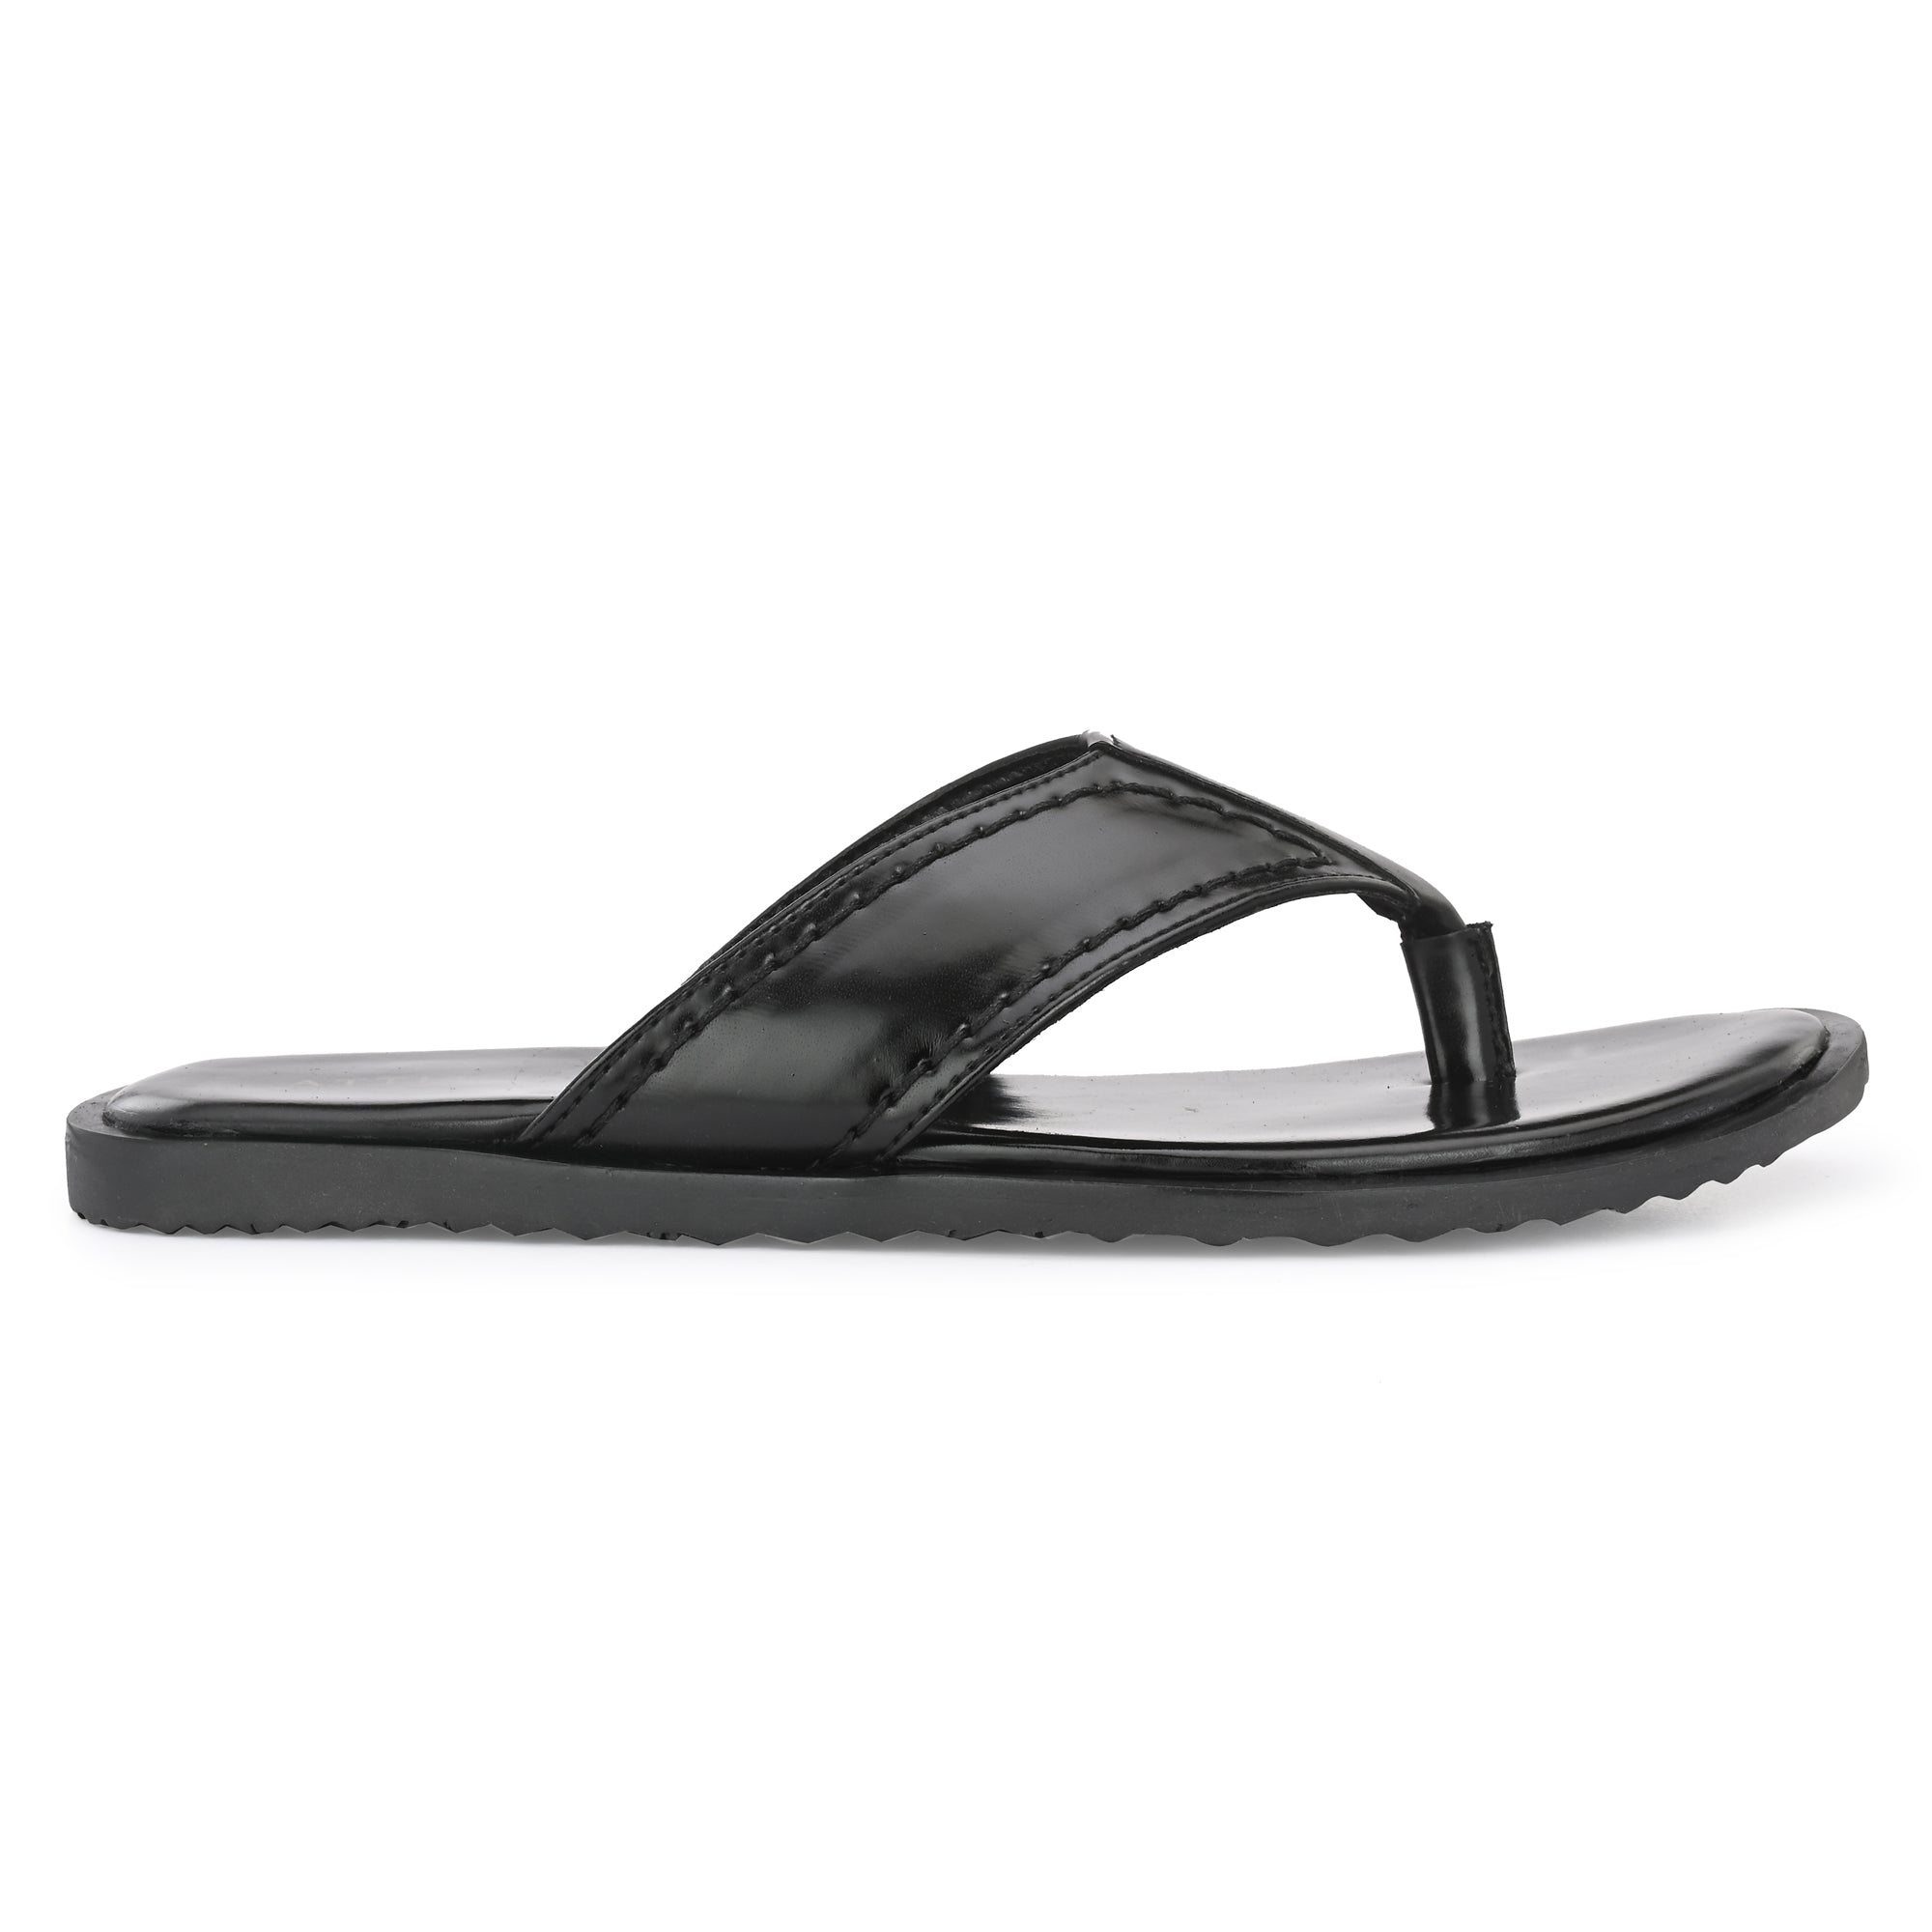 attitudist-black-double-stitched-strap-thong-slippers-for-men